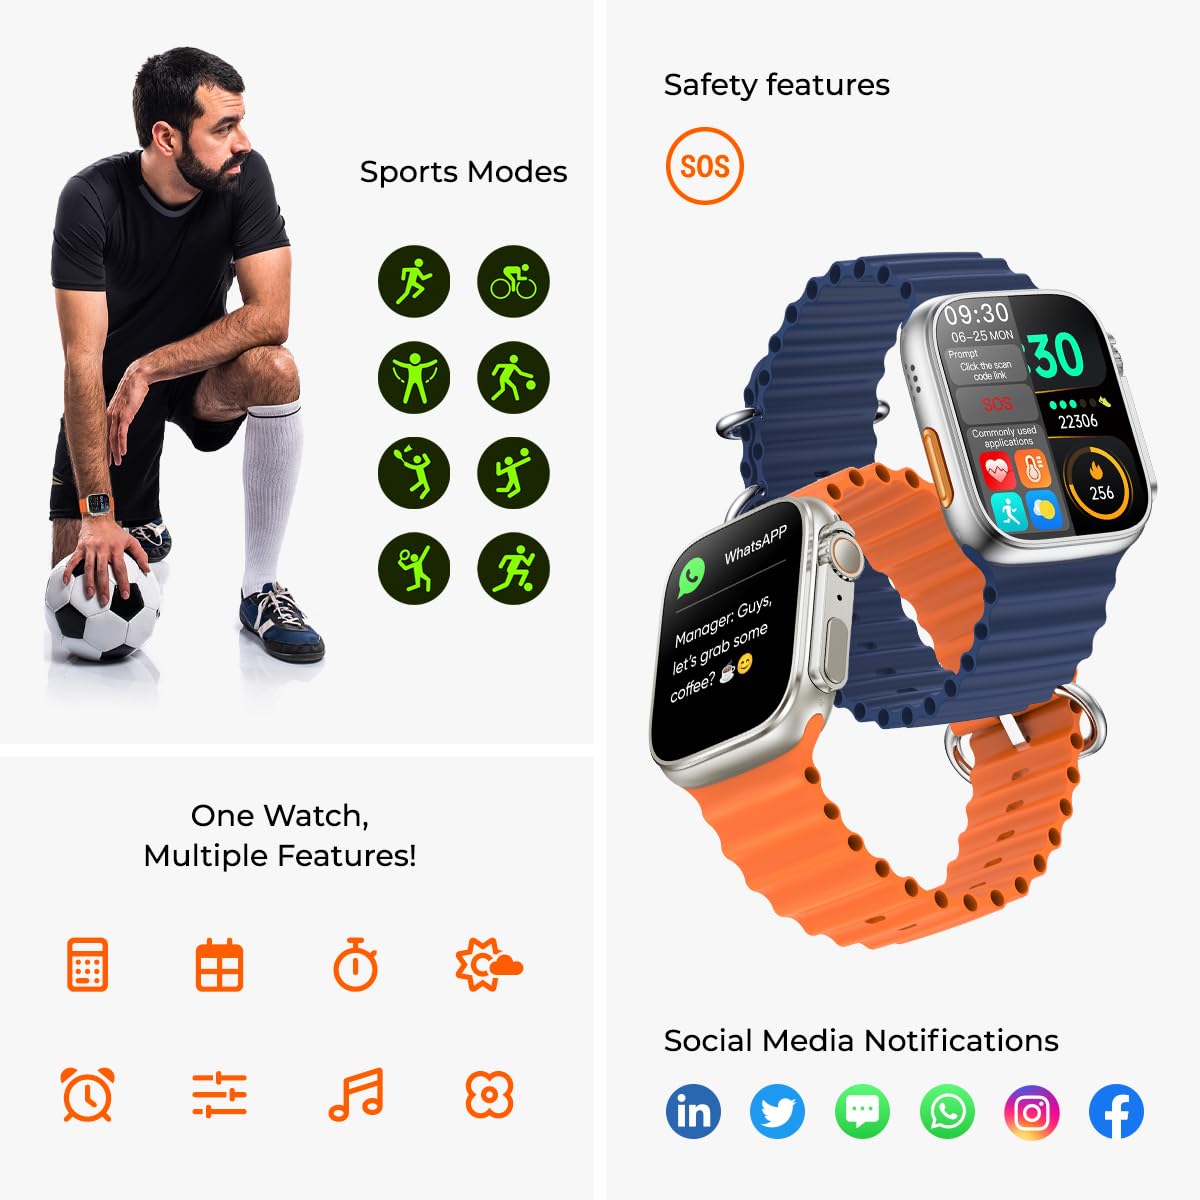 pTron Newly Launched Reflect Pro Smartwatch, Bluetooth Calling, 1.85" Full Touch Display, 600 NITS, Digital Crown, Metal Frame, 100+ Watch Faces, HR, SpO2, Voice Assist, 5 Days Battery Life (Blue)